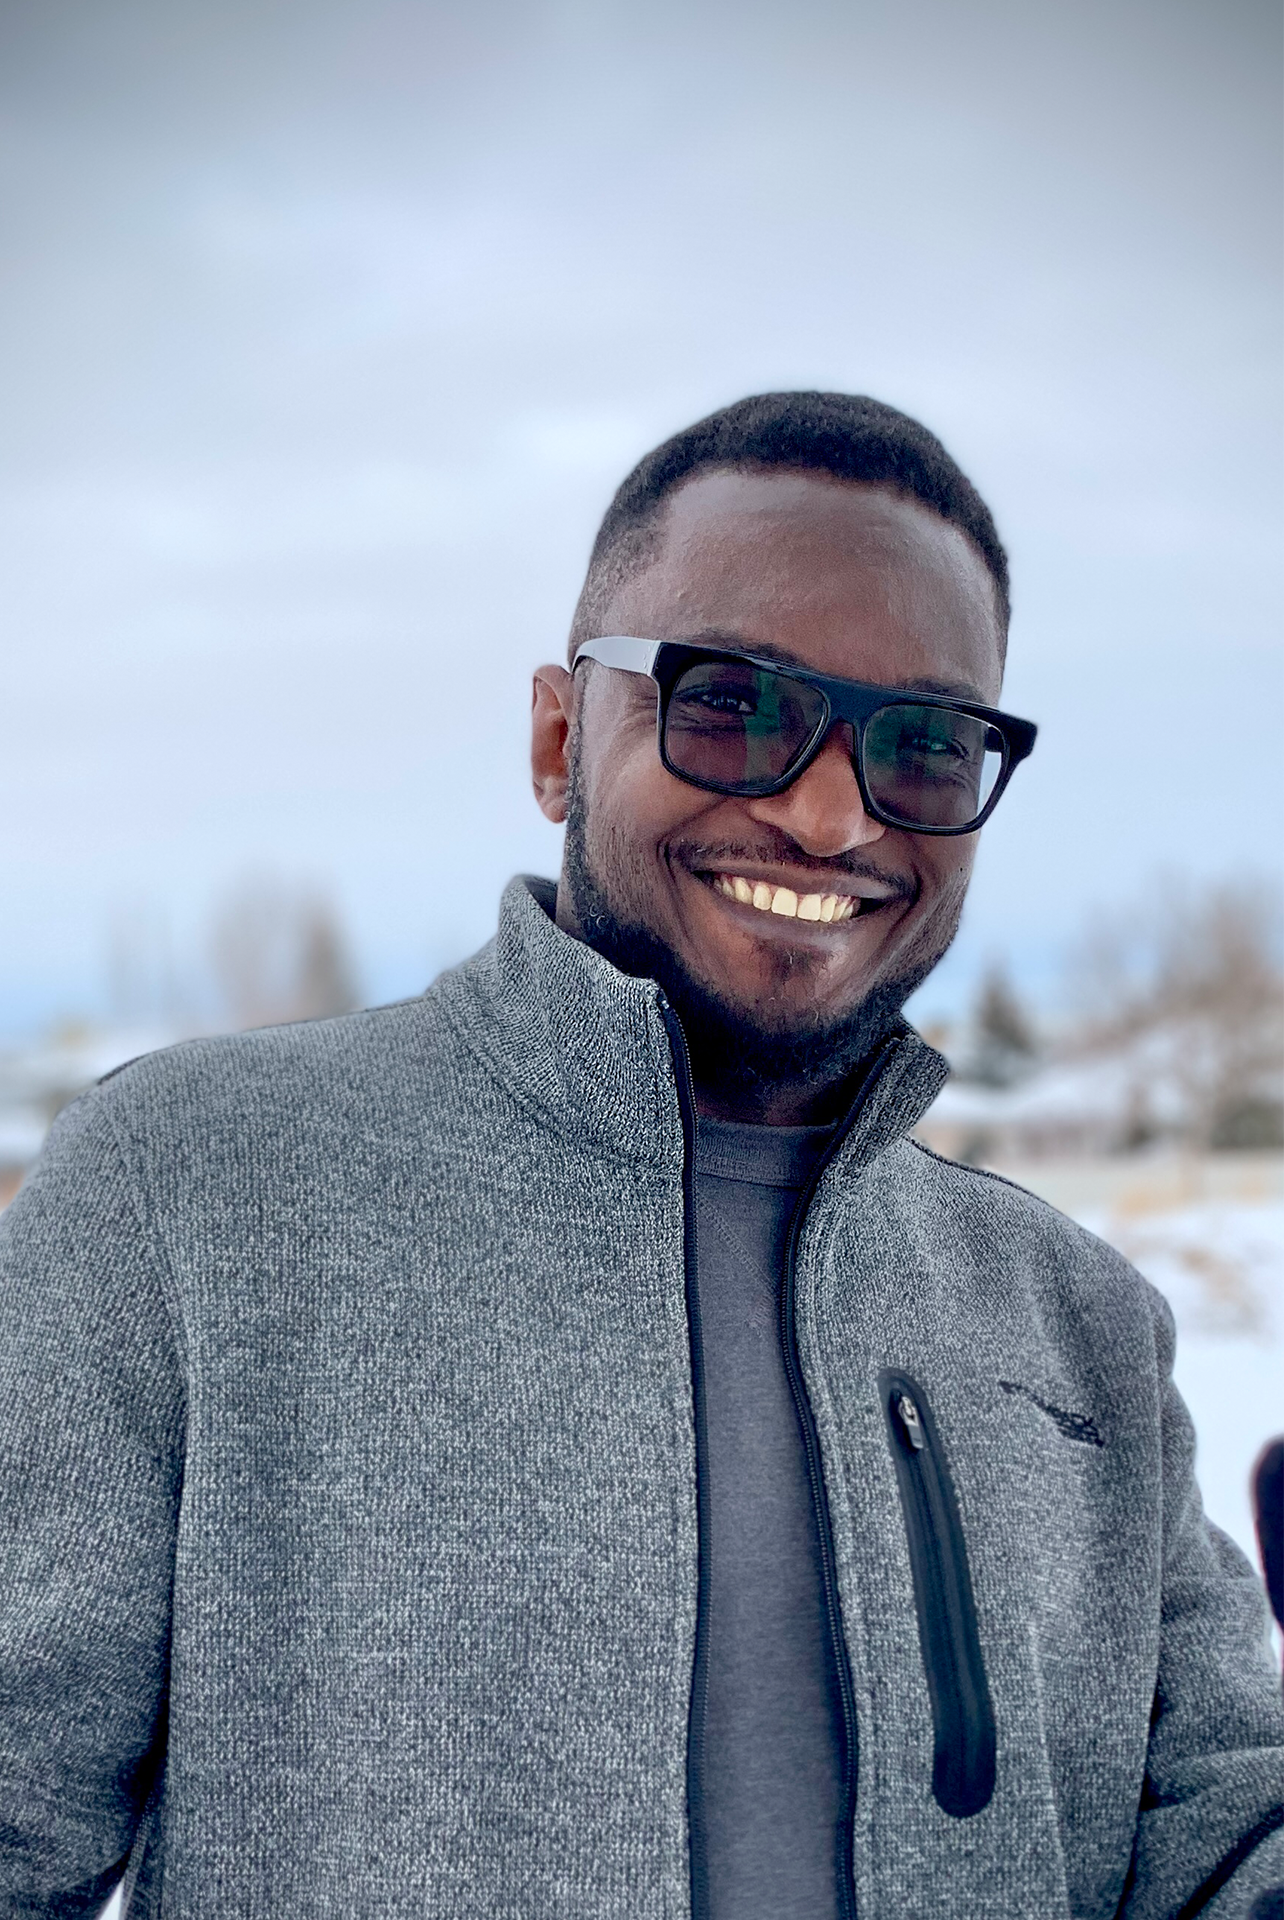 Kachi Eze standing in front of a snowy background